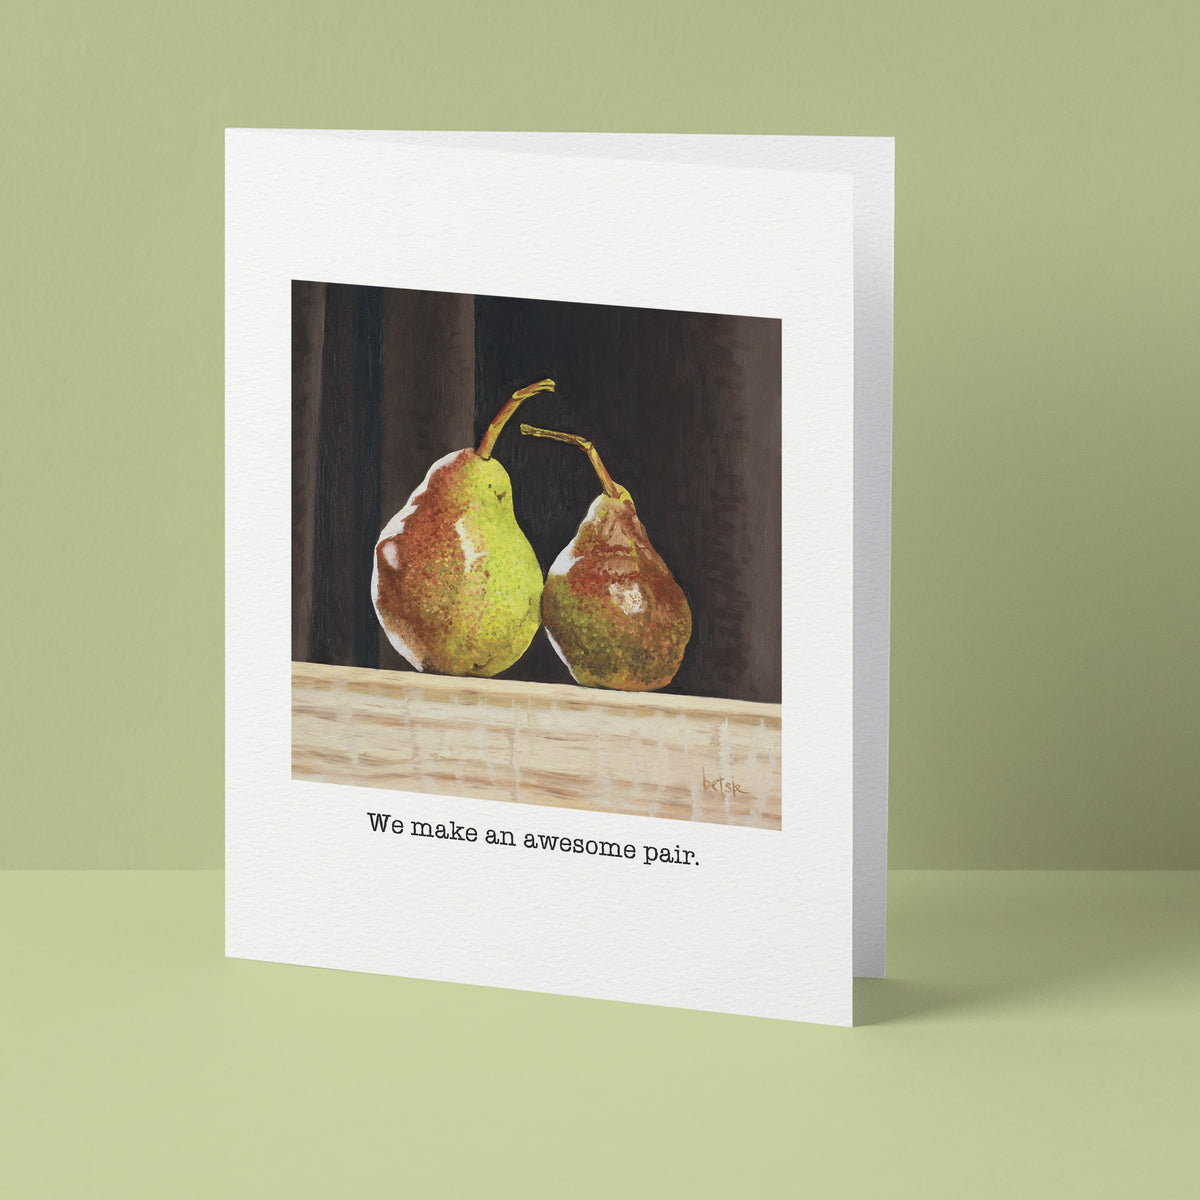 "We make an awesome pair" Greeting Card